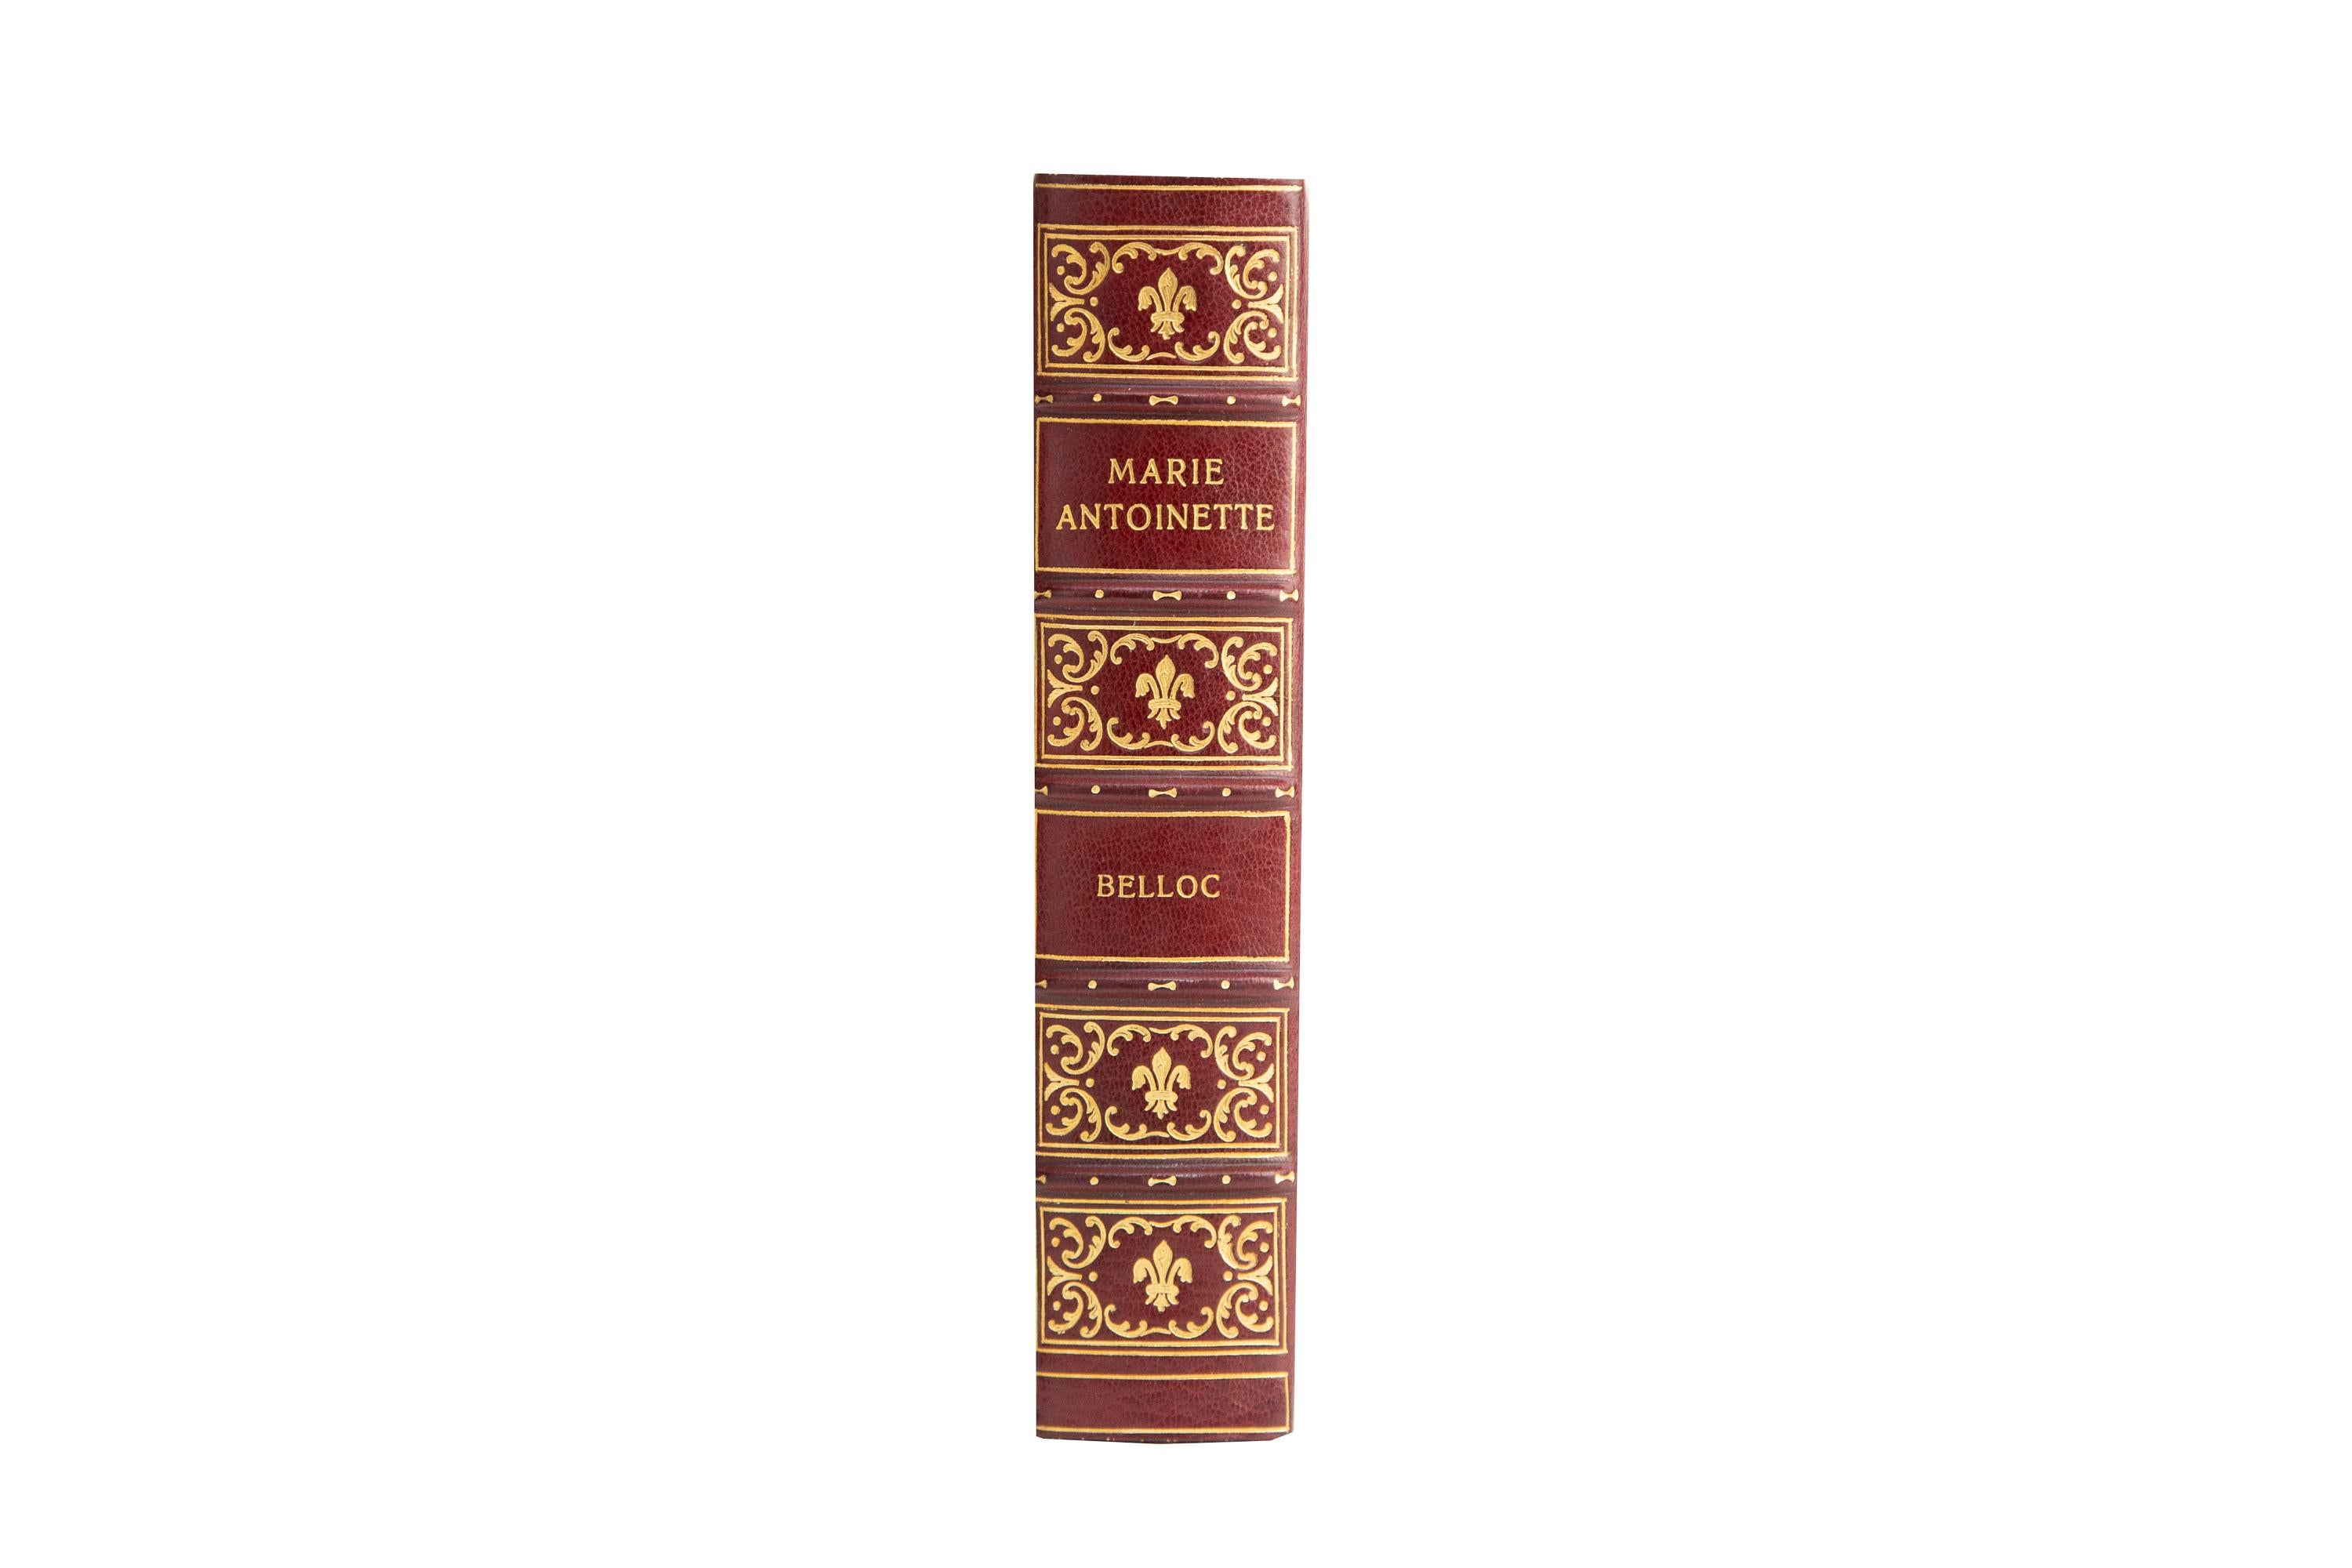 1 Volume. Hilaire Belloc, Marie Antoinette. In Good Condition For Sale In New York, NY